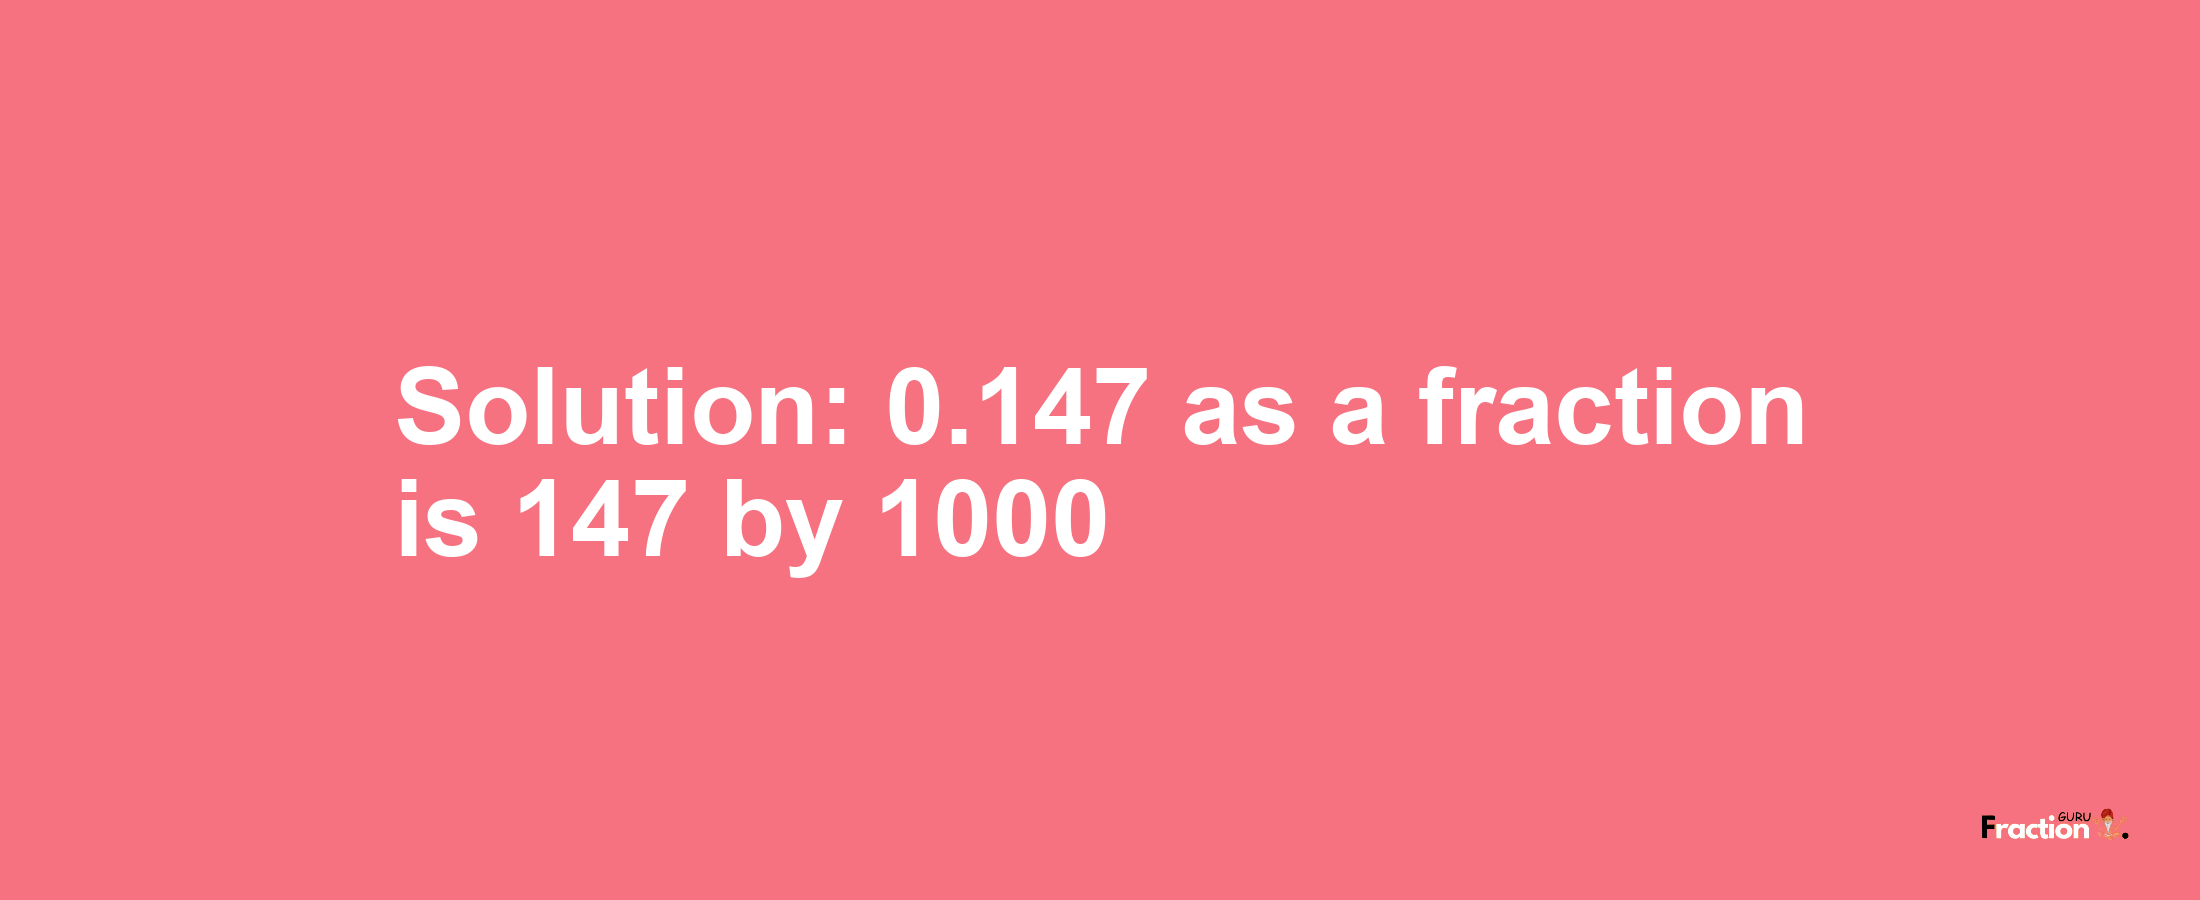 Solution:0.147 as a fraction is 147/1000